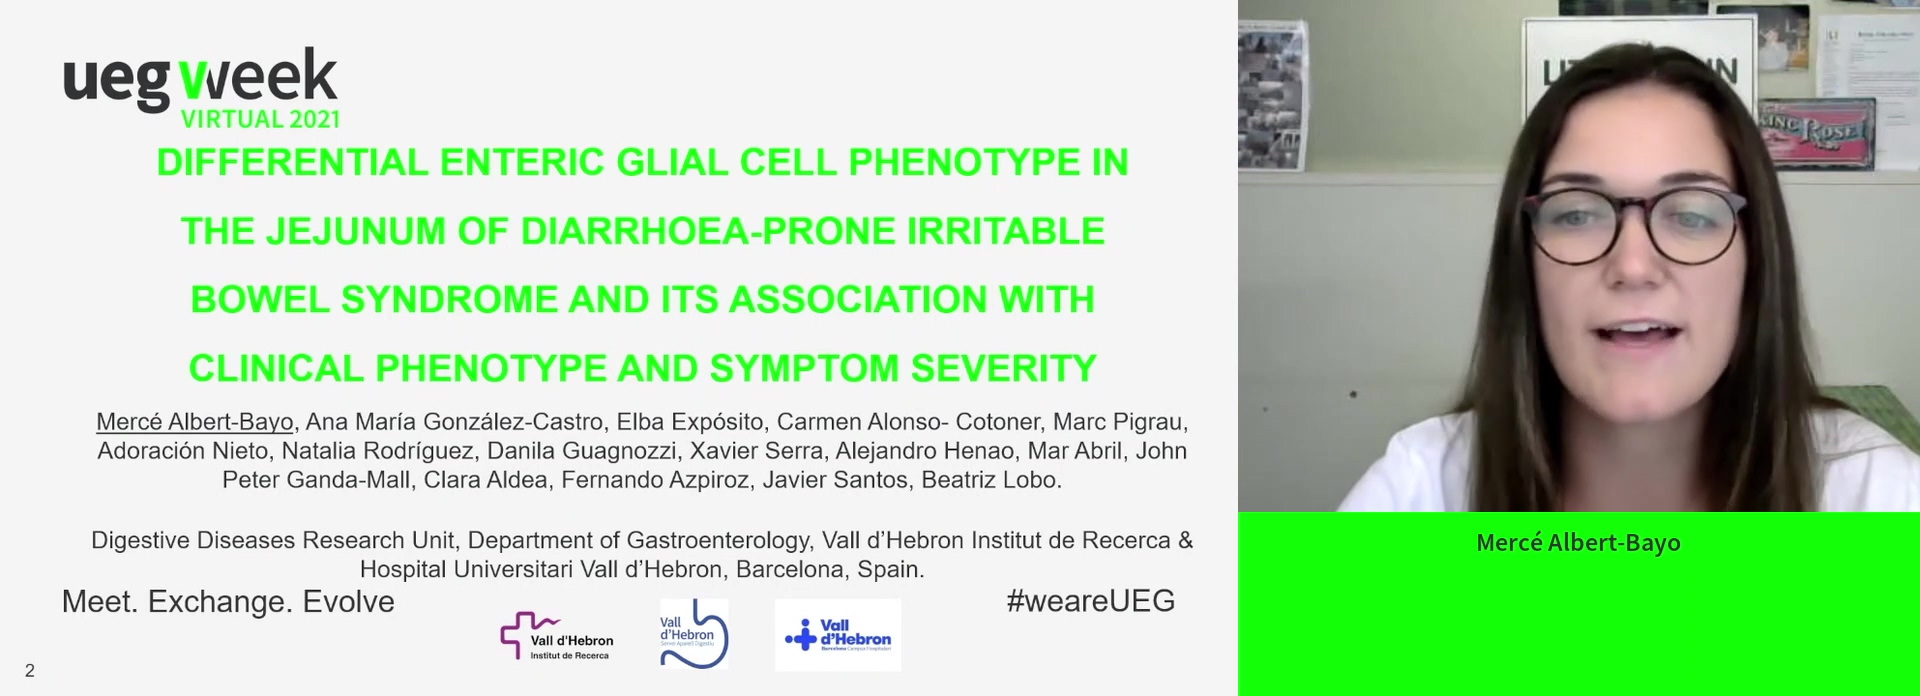 DIFFERENTIAL ENTERIC GLIAL CELL PHENOTYPE IN THE JEJUNUM OF DIARRHOEA-PRONE IRRITABLE BOWEL SYNDROME AND ITS ASSOCIATION WITH CLINICAL PHENOTYPE AND SYMPTOM SEVERITY